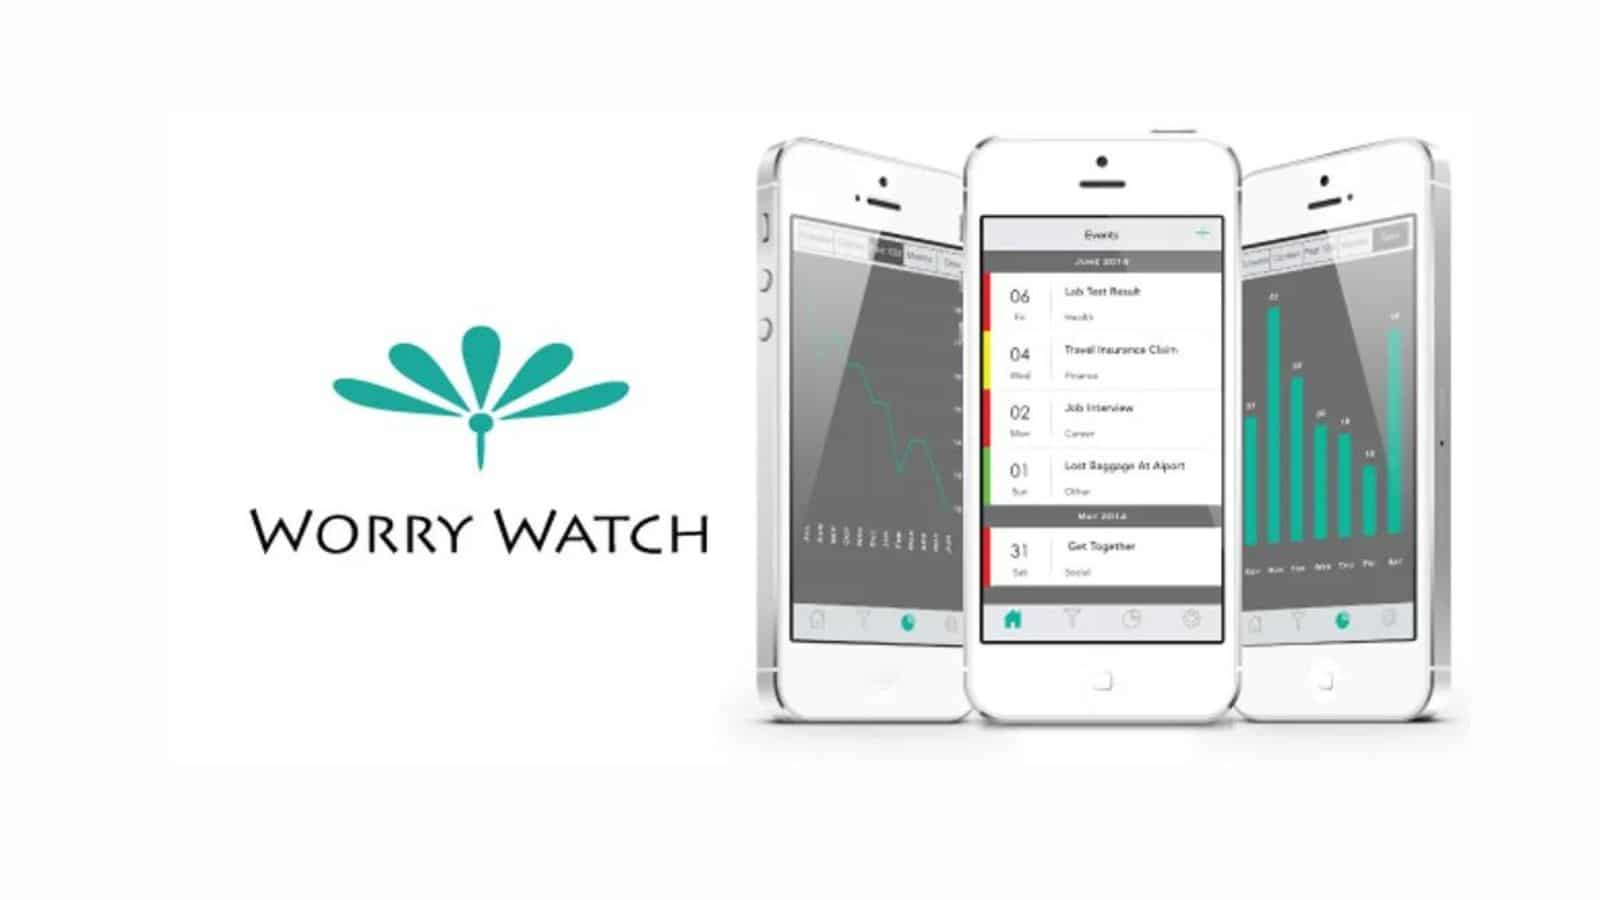 <p><a href="https://worrywatch.com/#worry-watch-app-mental-health-wellness" rel="noopener external noreferrer">Worry Watch</a>is a habit tracker designed to log and identify your worry trends. It’s a personal diary for worries, helping users better understand and manage their worry patterns. Worry Watch monitors users’ concerns in everyday life, improving mood and overall well-being. The app works offline; no internet connection is needed except during iCloud sync.</p>